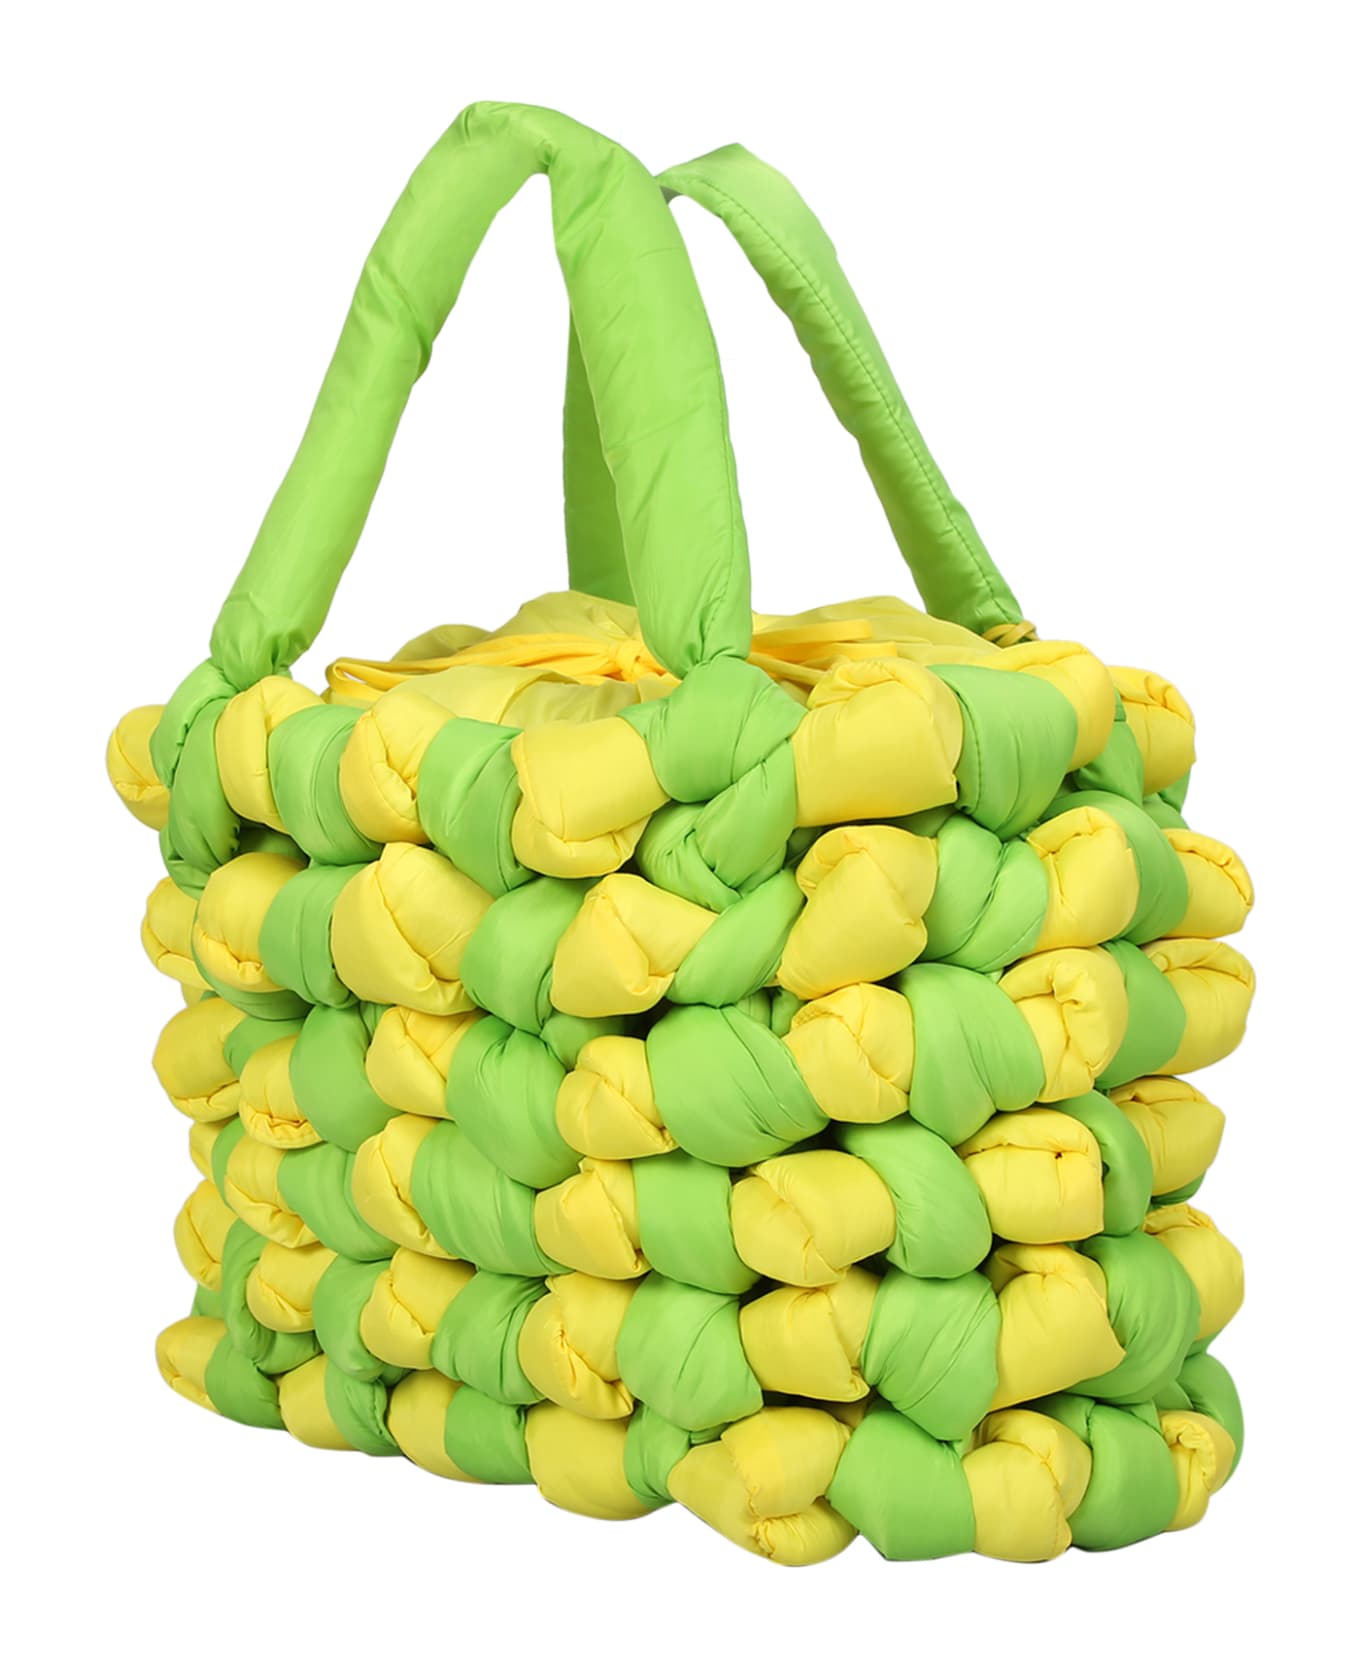 J.W. Anderson Large Knotted Lime Green/yellow Bag - Green トートバッグ